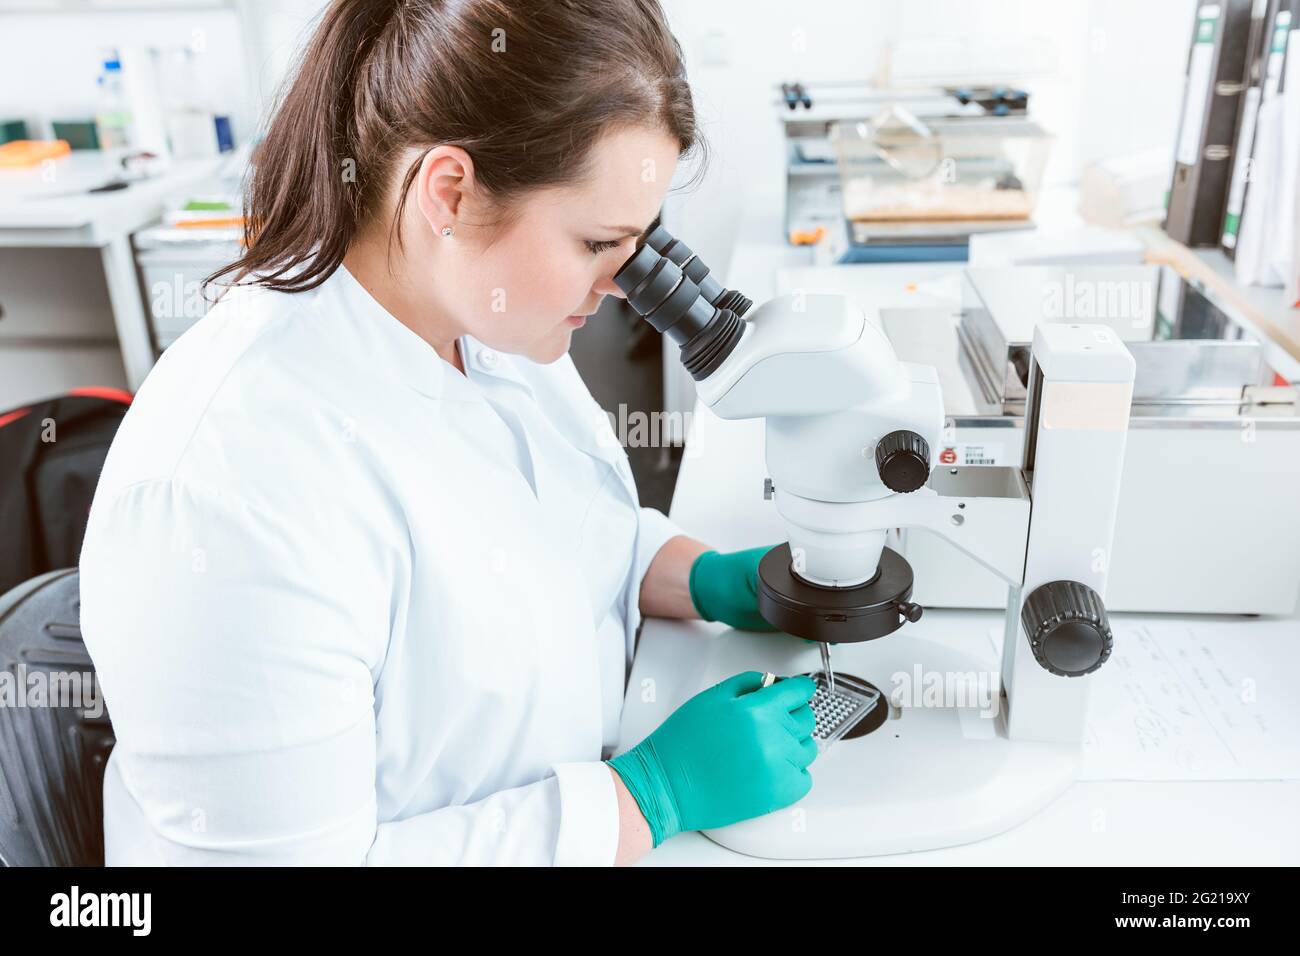 Woman researcher using microscope in lab Stock Photo